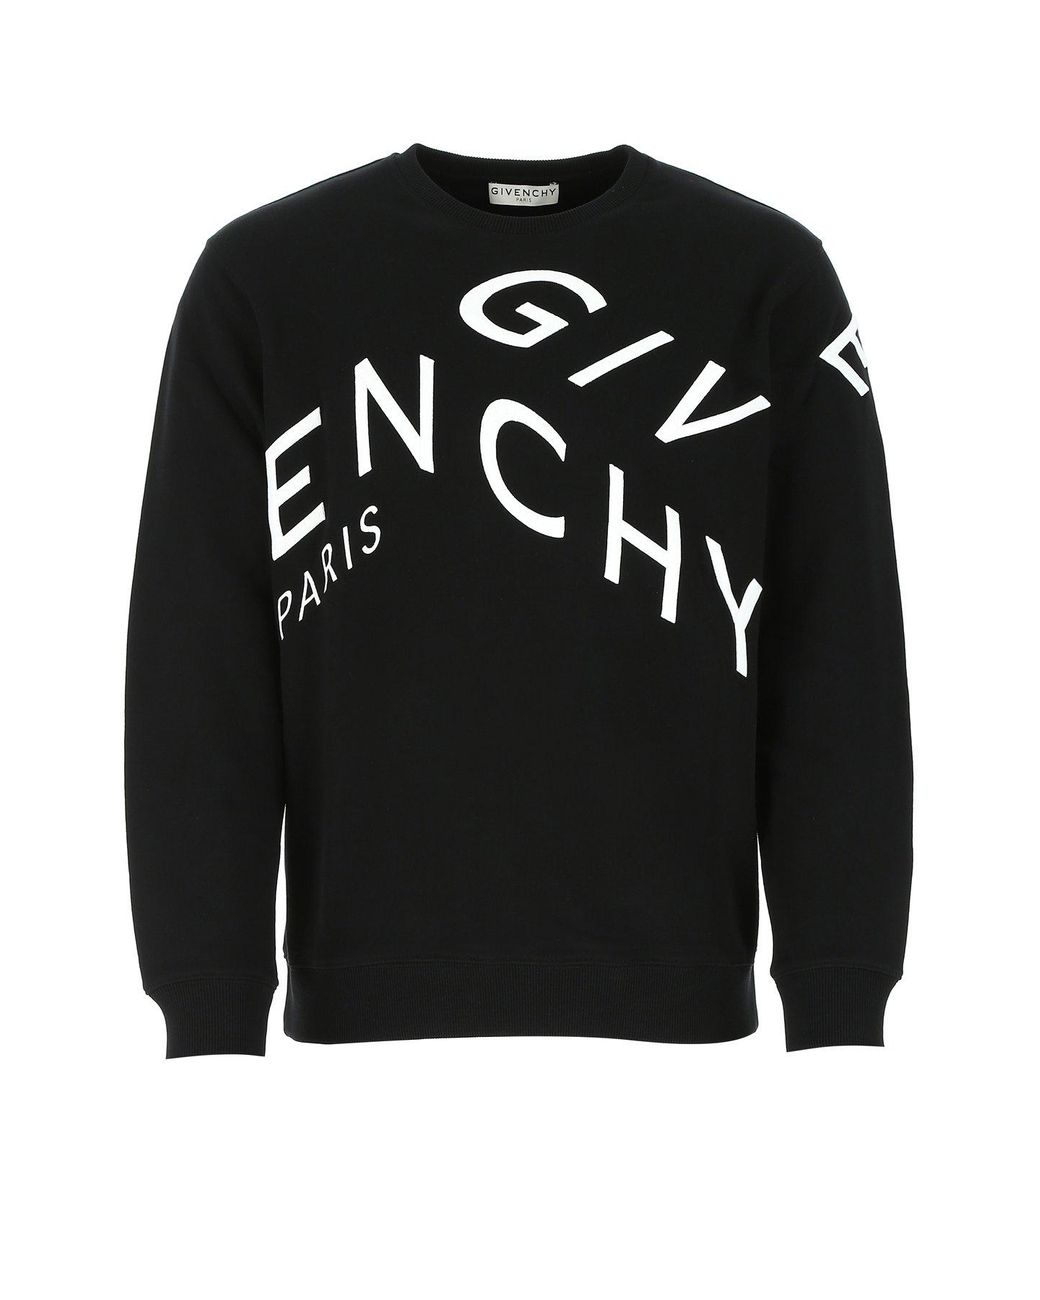 Givenchy Cotton Refracted Sweatshirt in Black for Men - Lyst